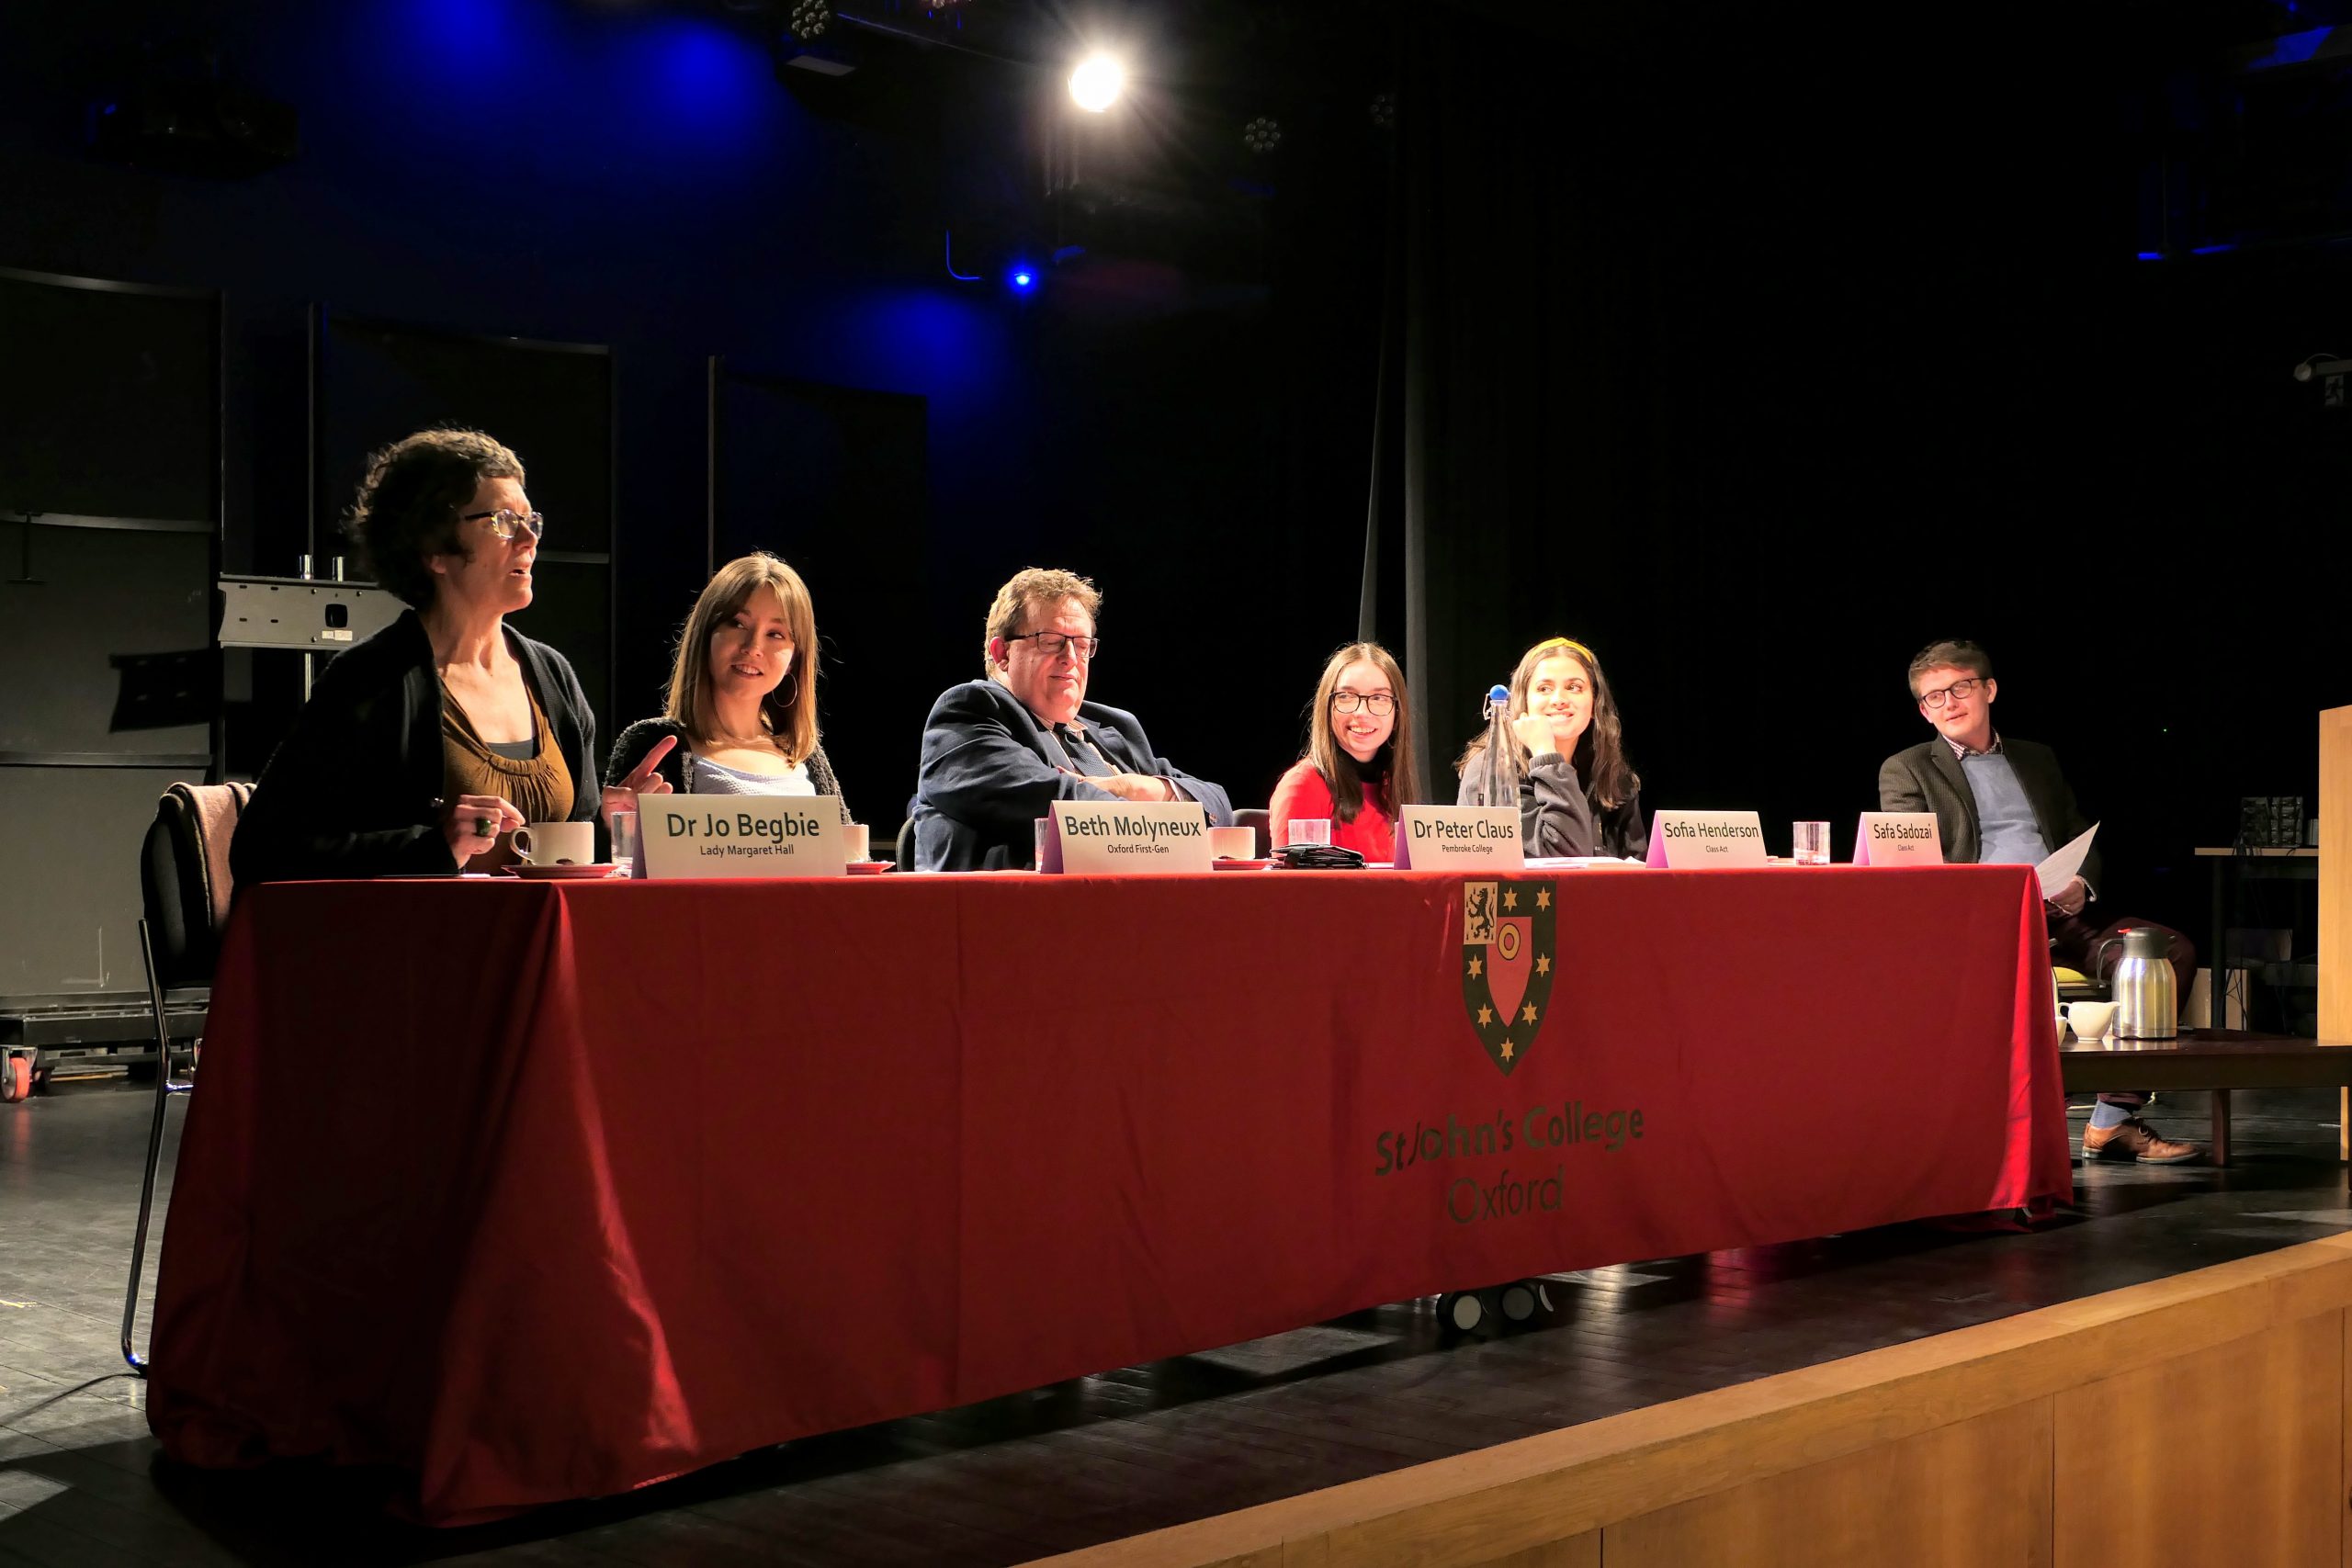 Changing the Face of Oxford: panel discussion at St John’s